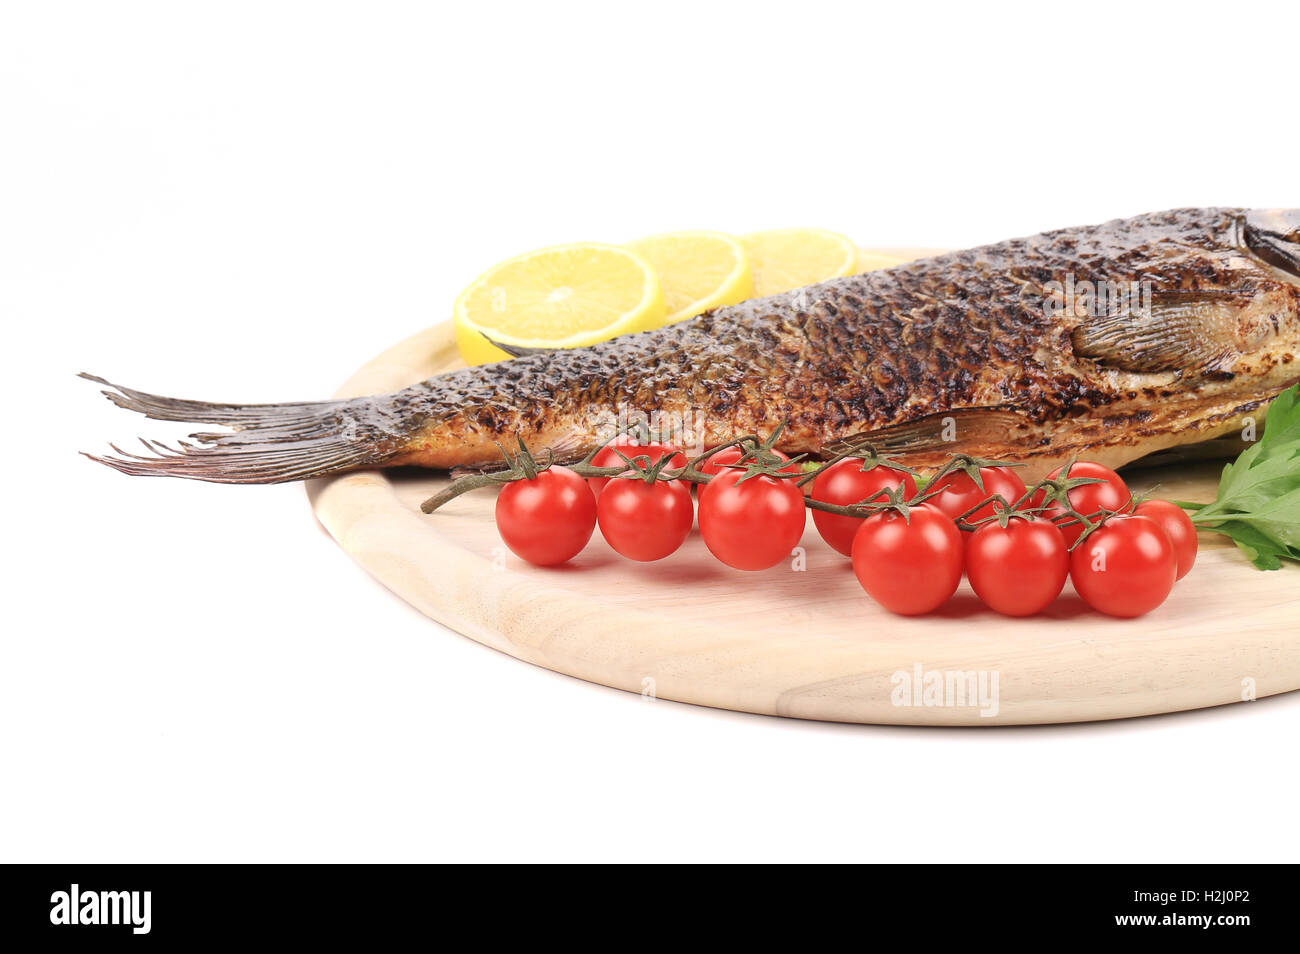 Grilled carp fish with tomatoes. Stock Photo